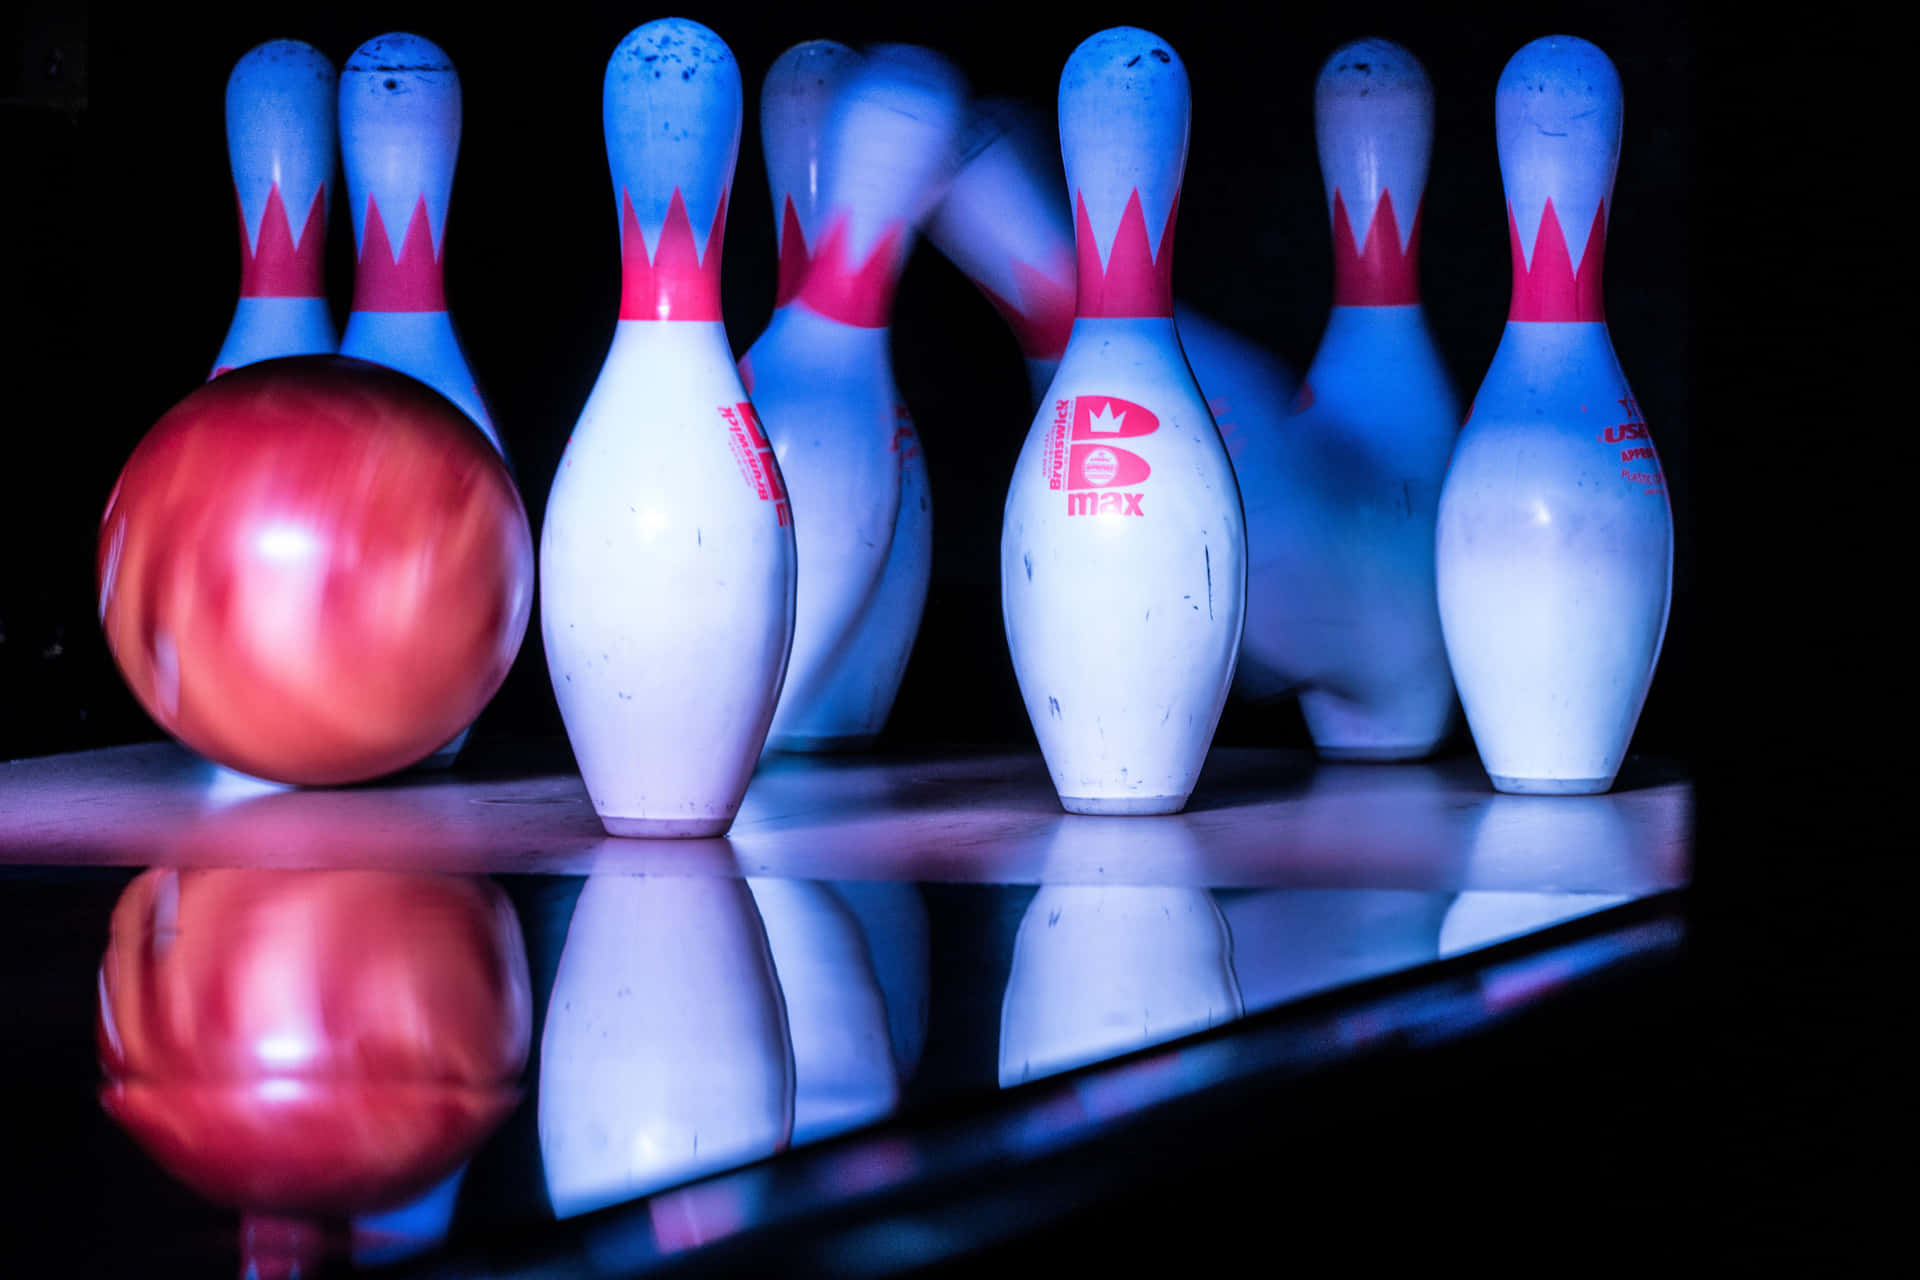 Let's enjoy a great game of bowling with friends!